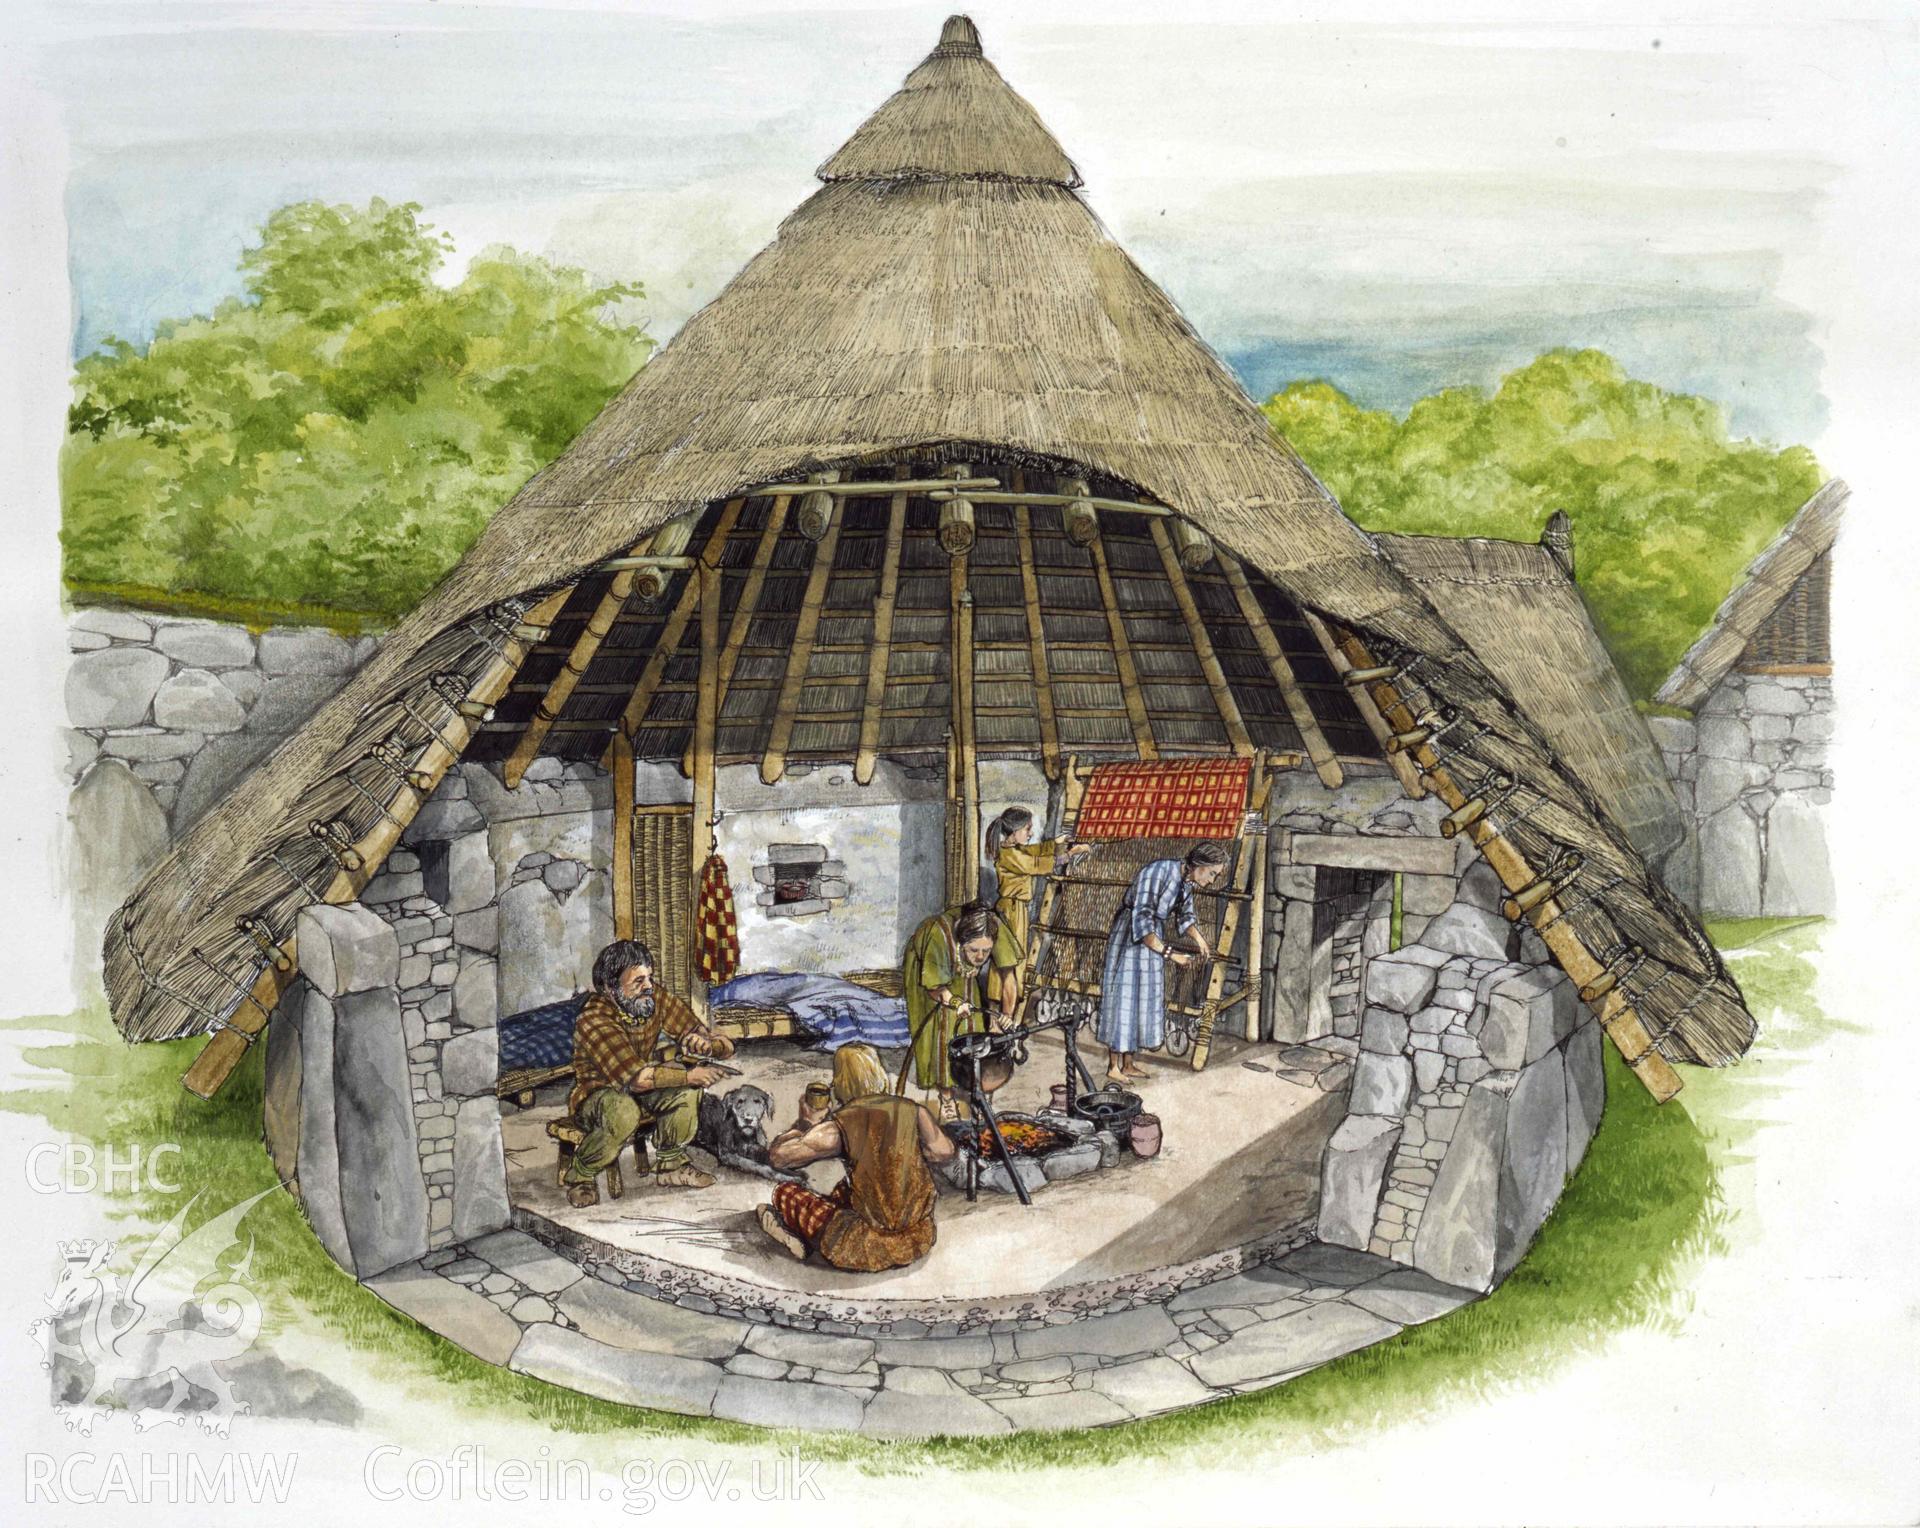 Digital copy of a watercolour cutaway reconstruction of Din Lligwy roundhouse by Brian Byron for Menter Môn. ©Menter Môn 2005, with funding from the Heritage Lottery Fund, Cadw and Welsh Assembly Government; illustration by Brian Byron.